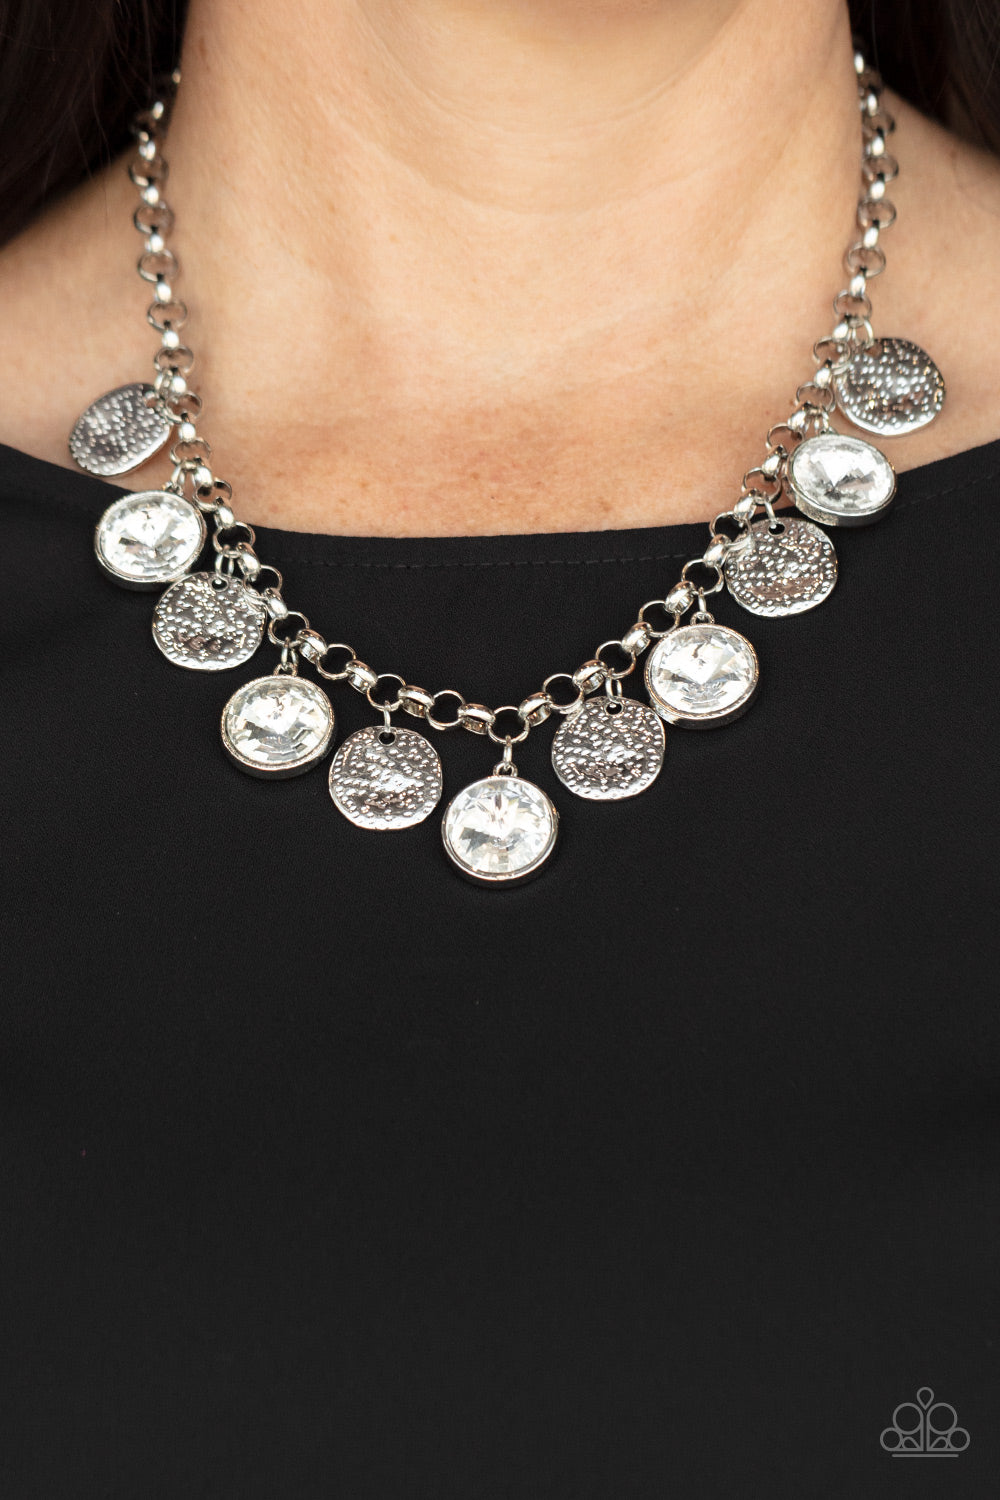 Spot On Sparkle White Necklace - Paparazzi Accessories  A blinding collection of hammered silver discs and oversized white gems swing from the bottom of a bold silver chain, creating noise-making sparkle below the collar. Features an adjustable clasp closure.  All Paparazzi Accessories are lead free and nickel free!  Sold as one individual necklace. Includes one pair of matching earrings.